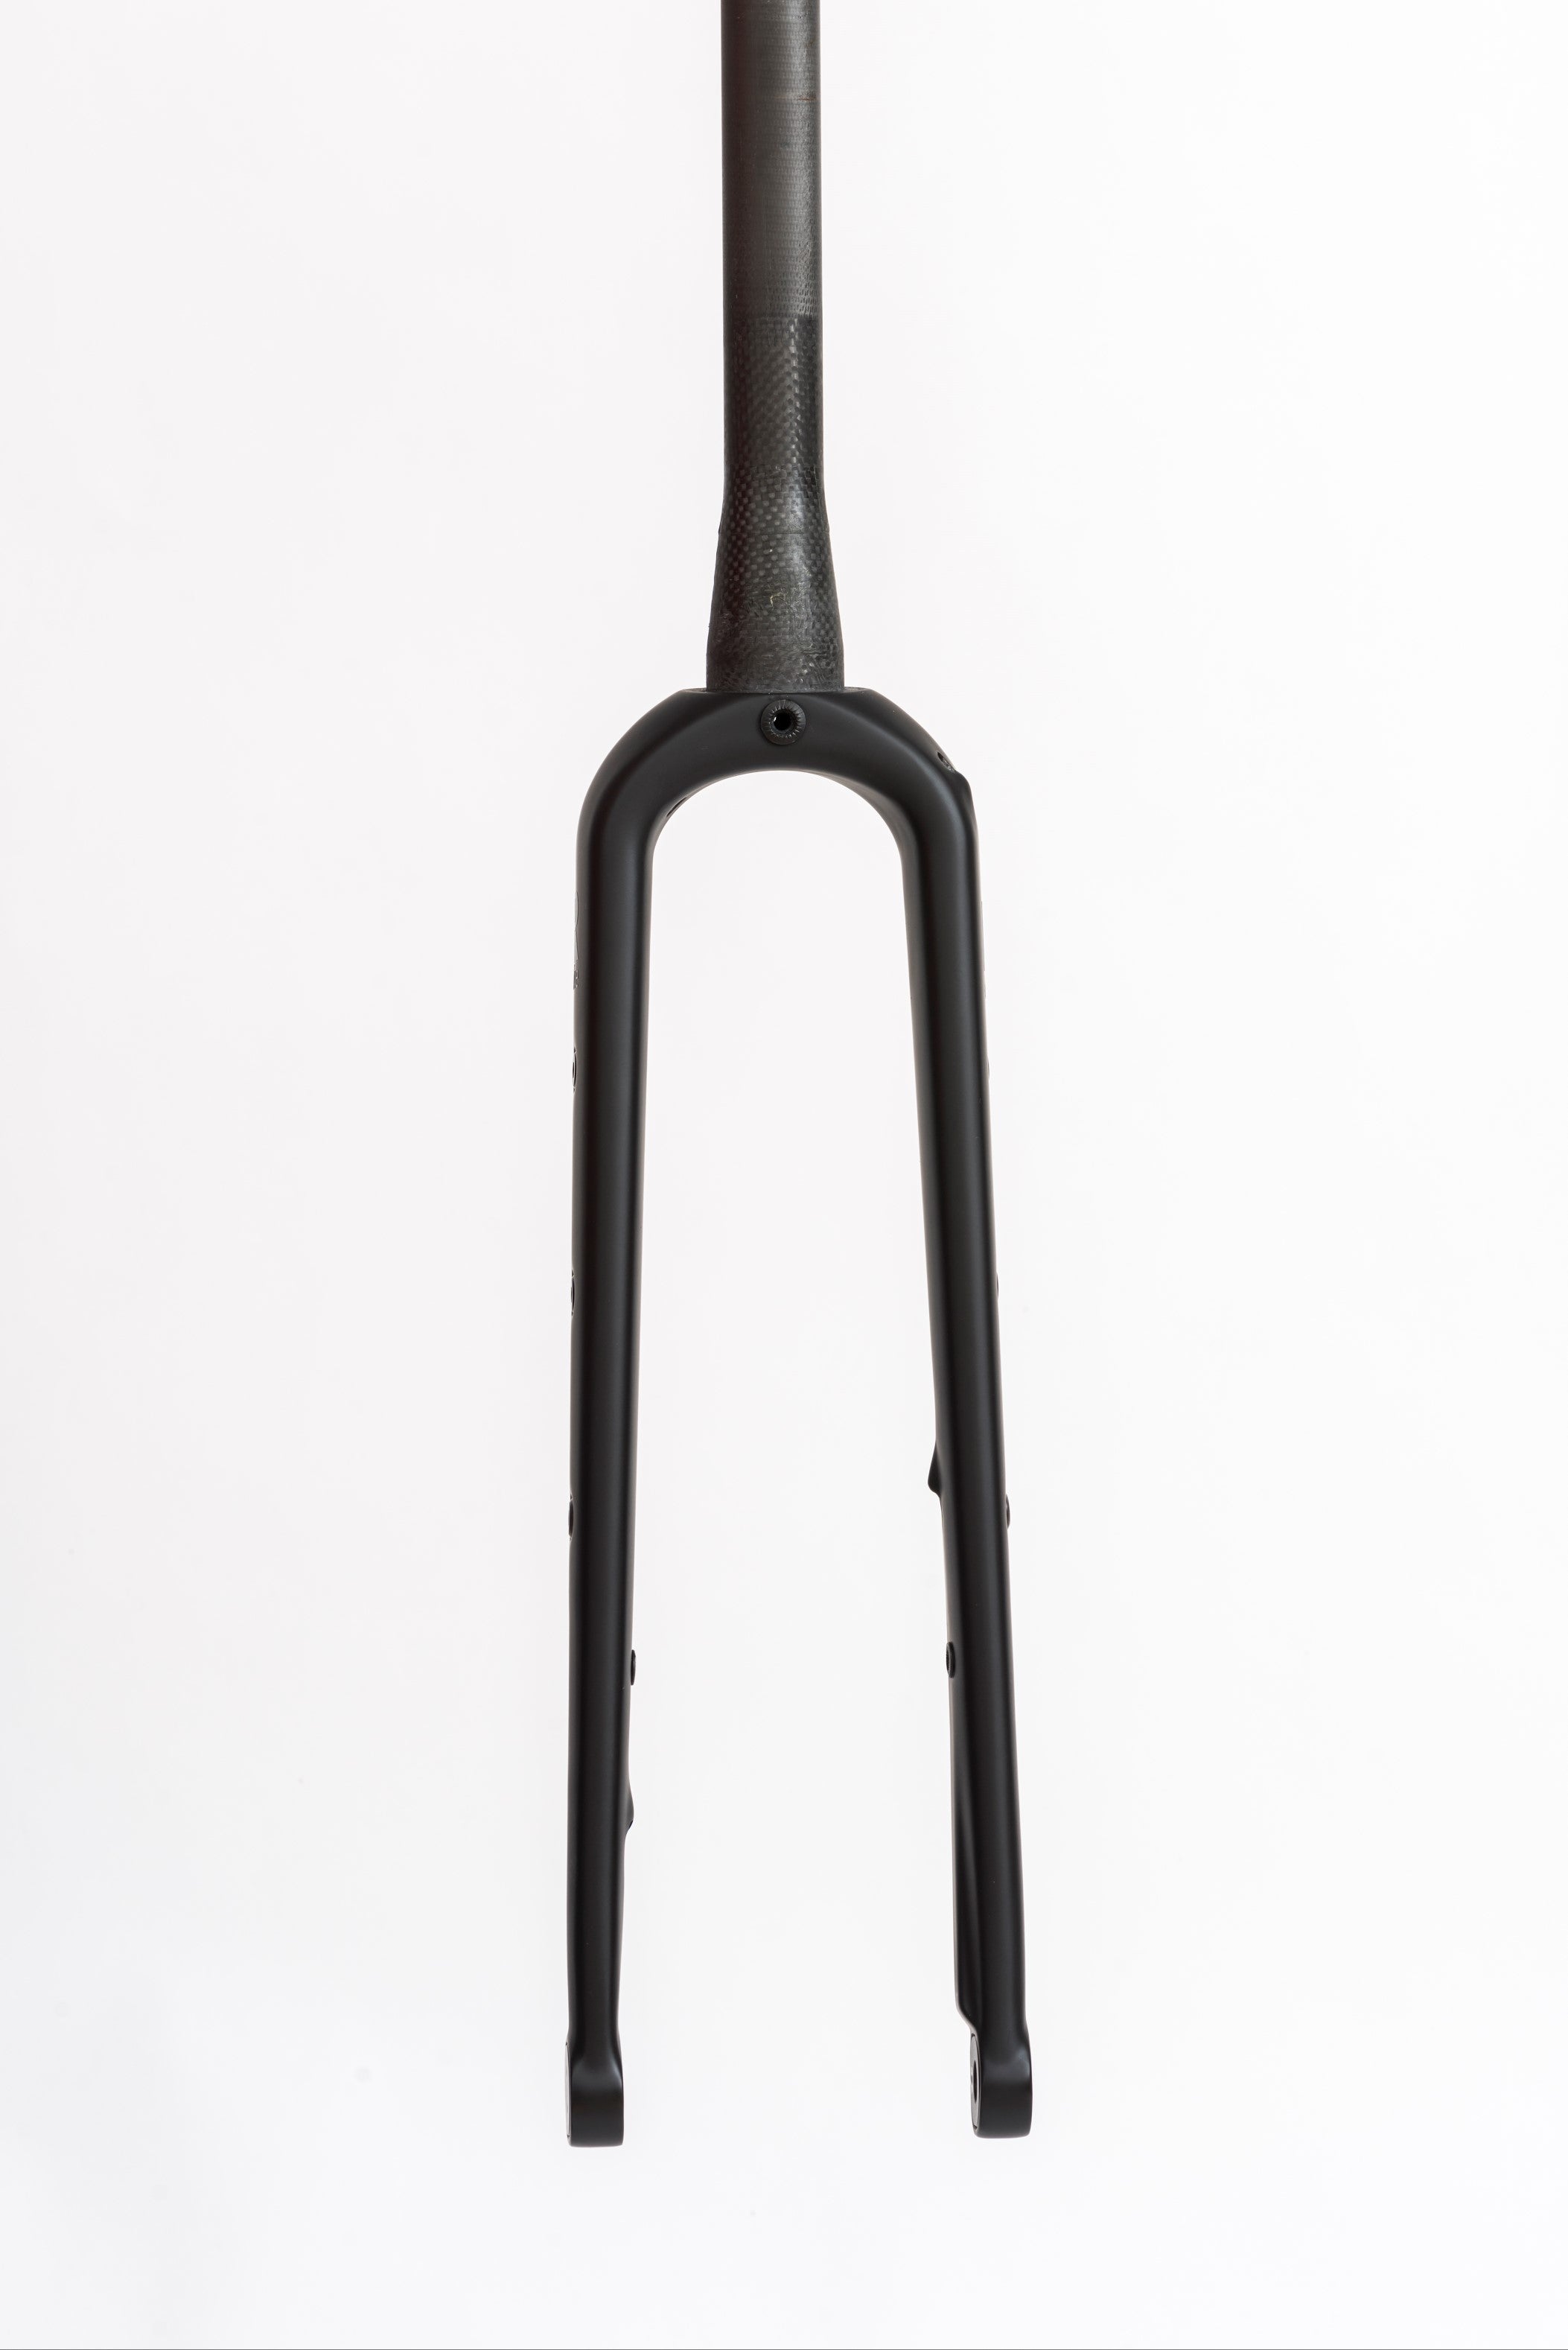 Reilly carbon adventure fork side on against white background